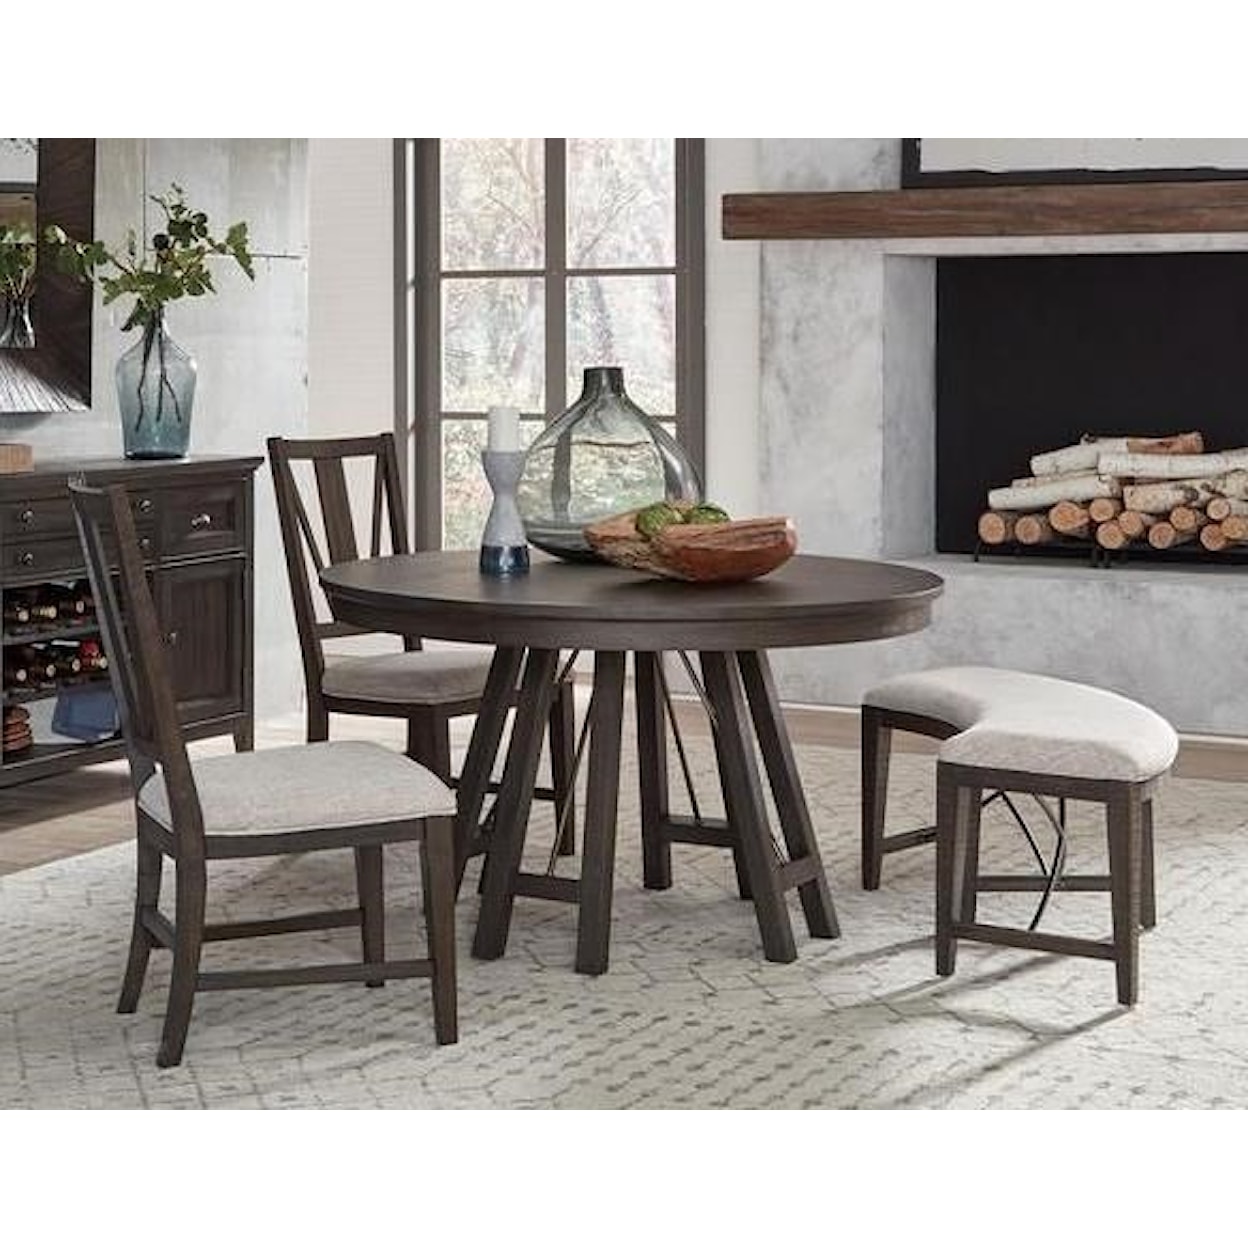 Magnussen Home Westley Falls Dining 4-Piece Table Set